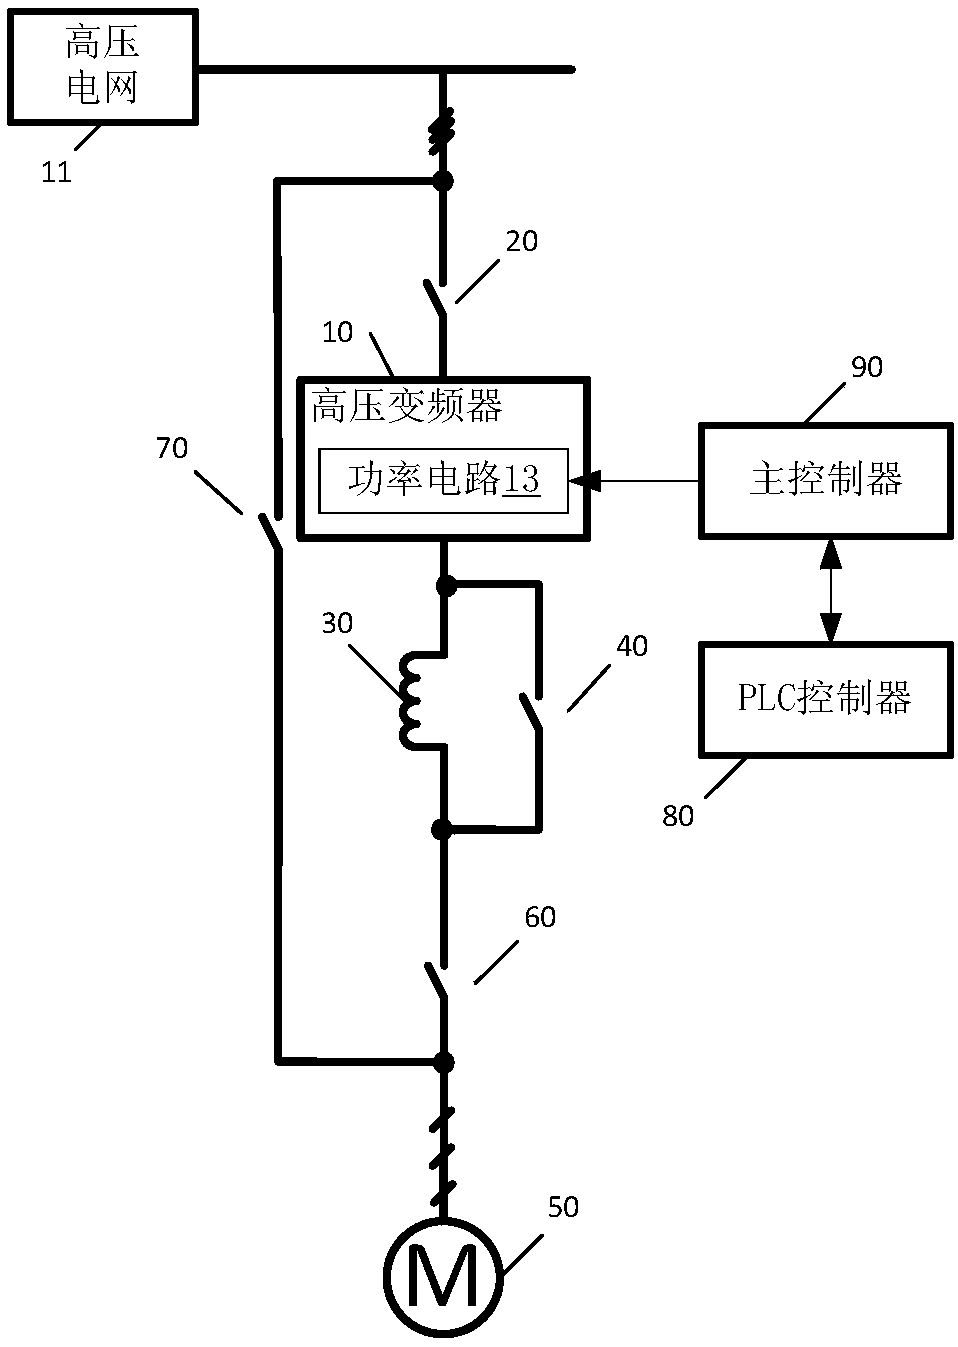 Synchronous switching method of industrial frequency conversion operation based on high-voltage frequency converter motor control system